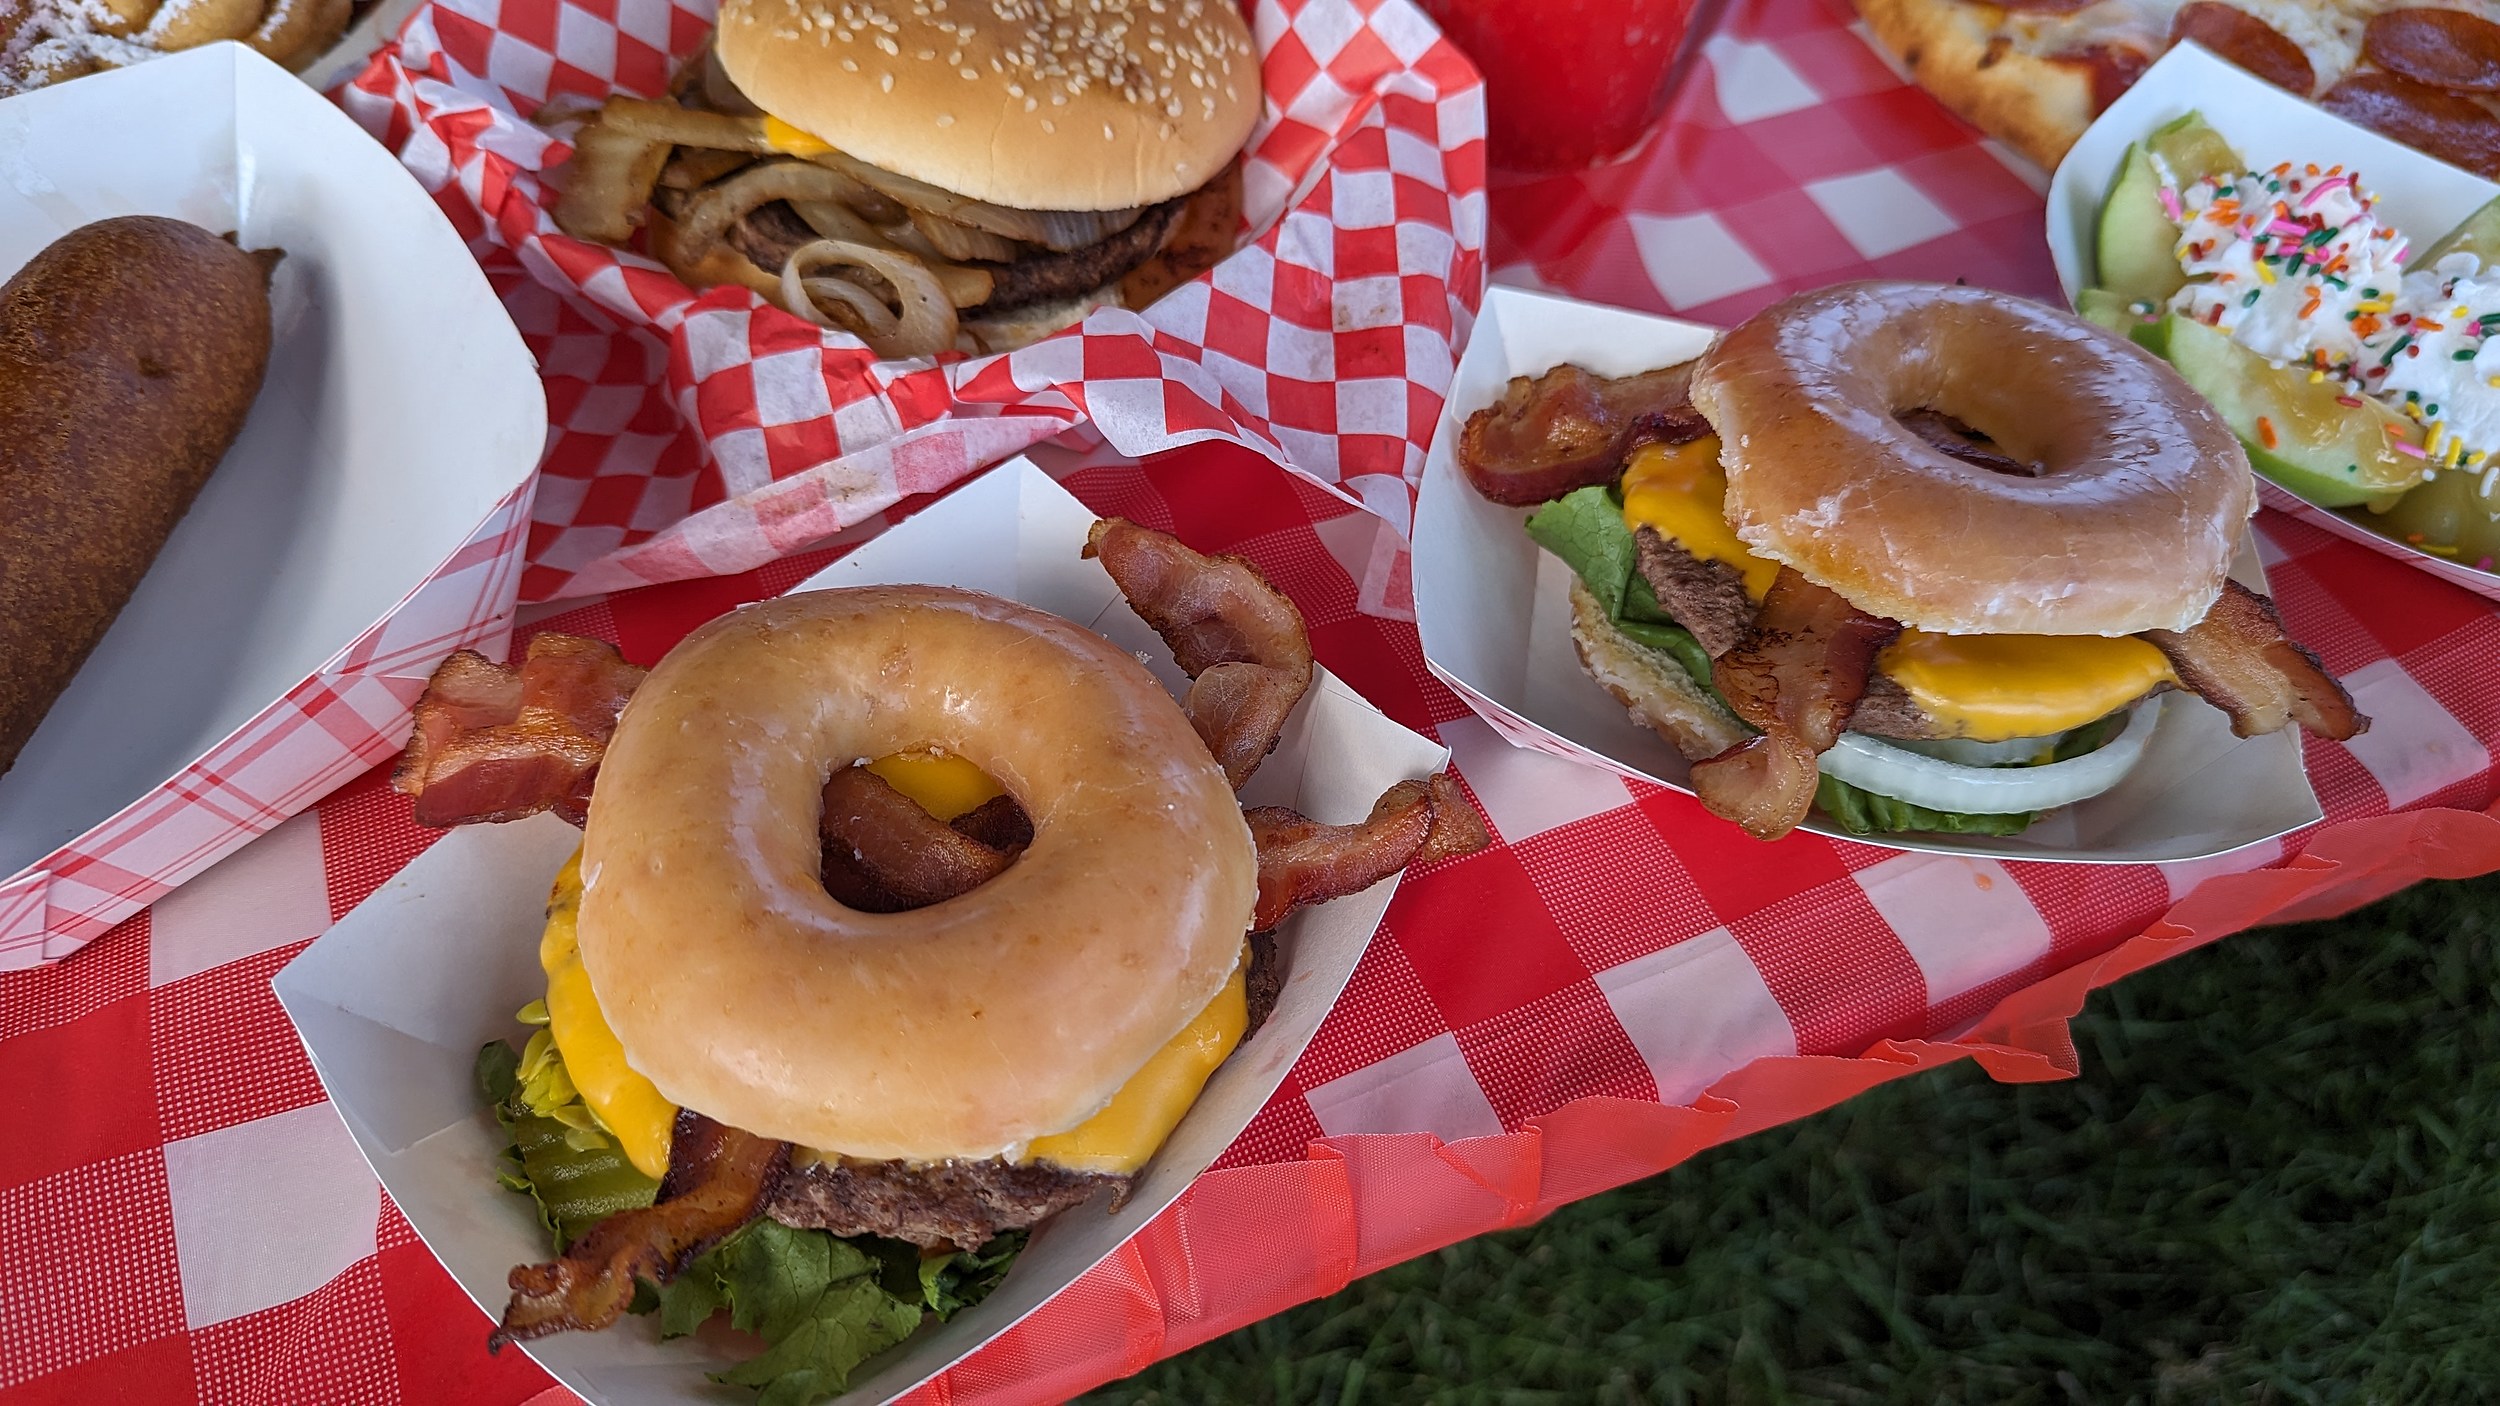 Krispy Kreme Burger, Pickle Pizza Among New Foods at This Years Central Washington State Fair image